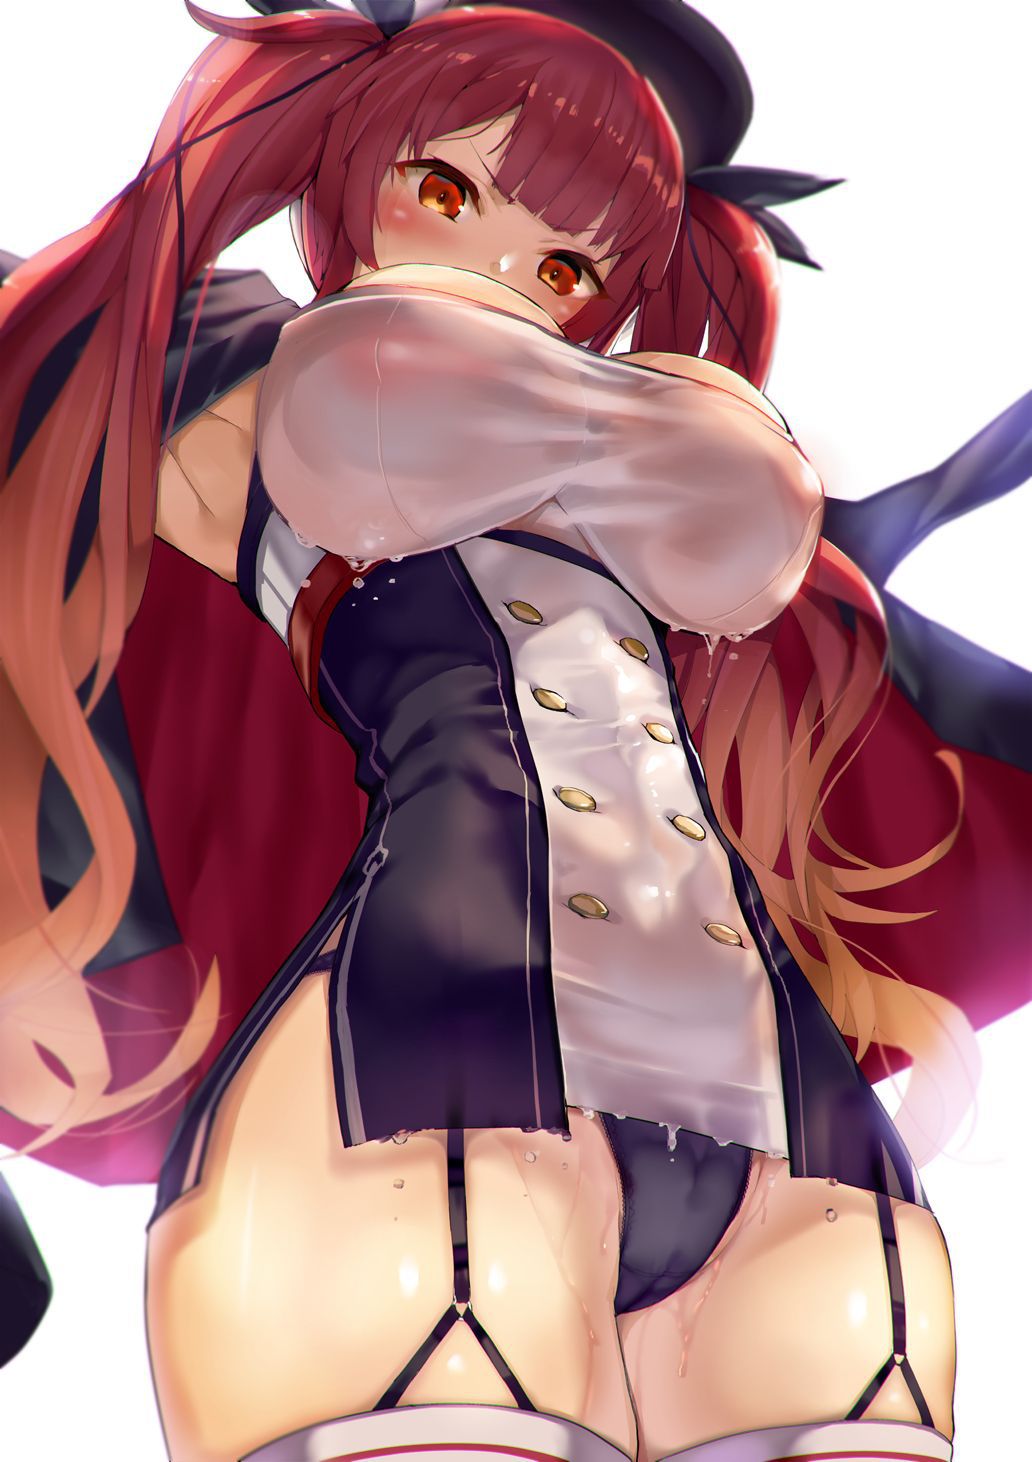 Secondary erotic erotic image of the body of the girl of twin tail is here 10